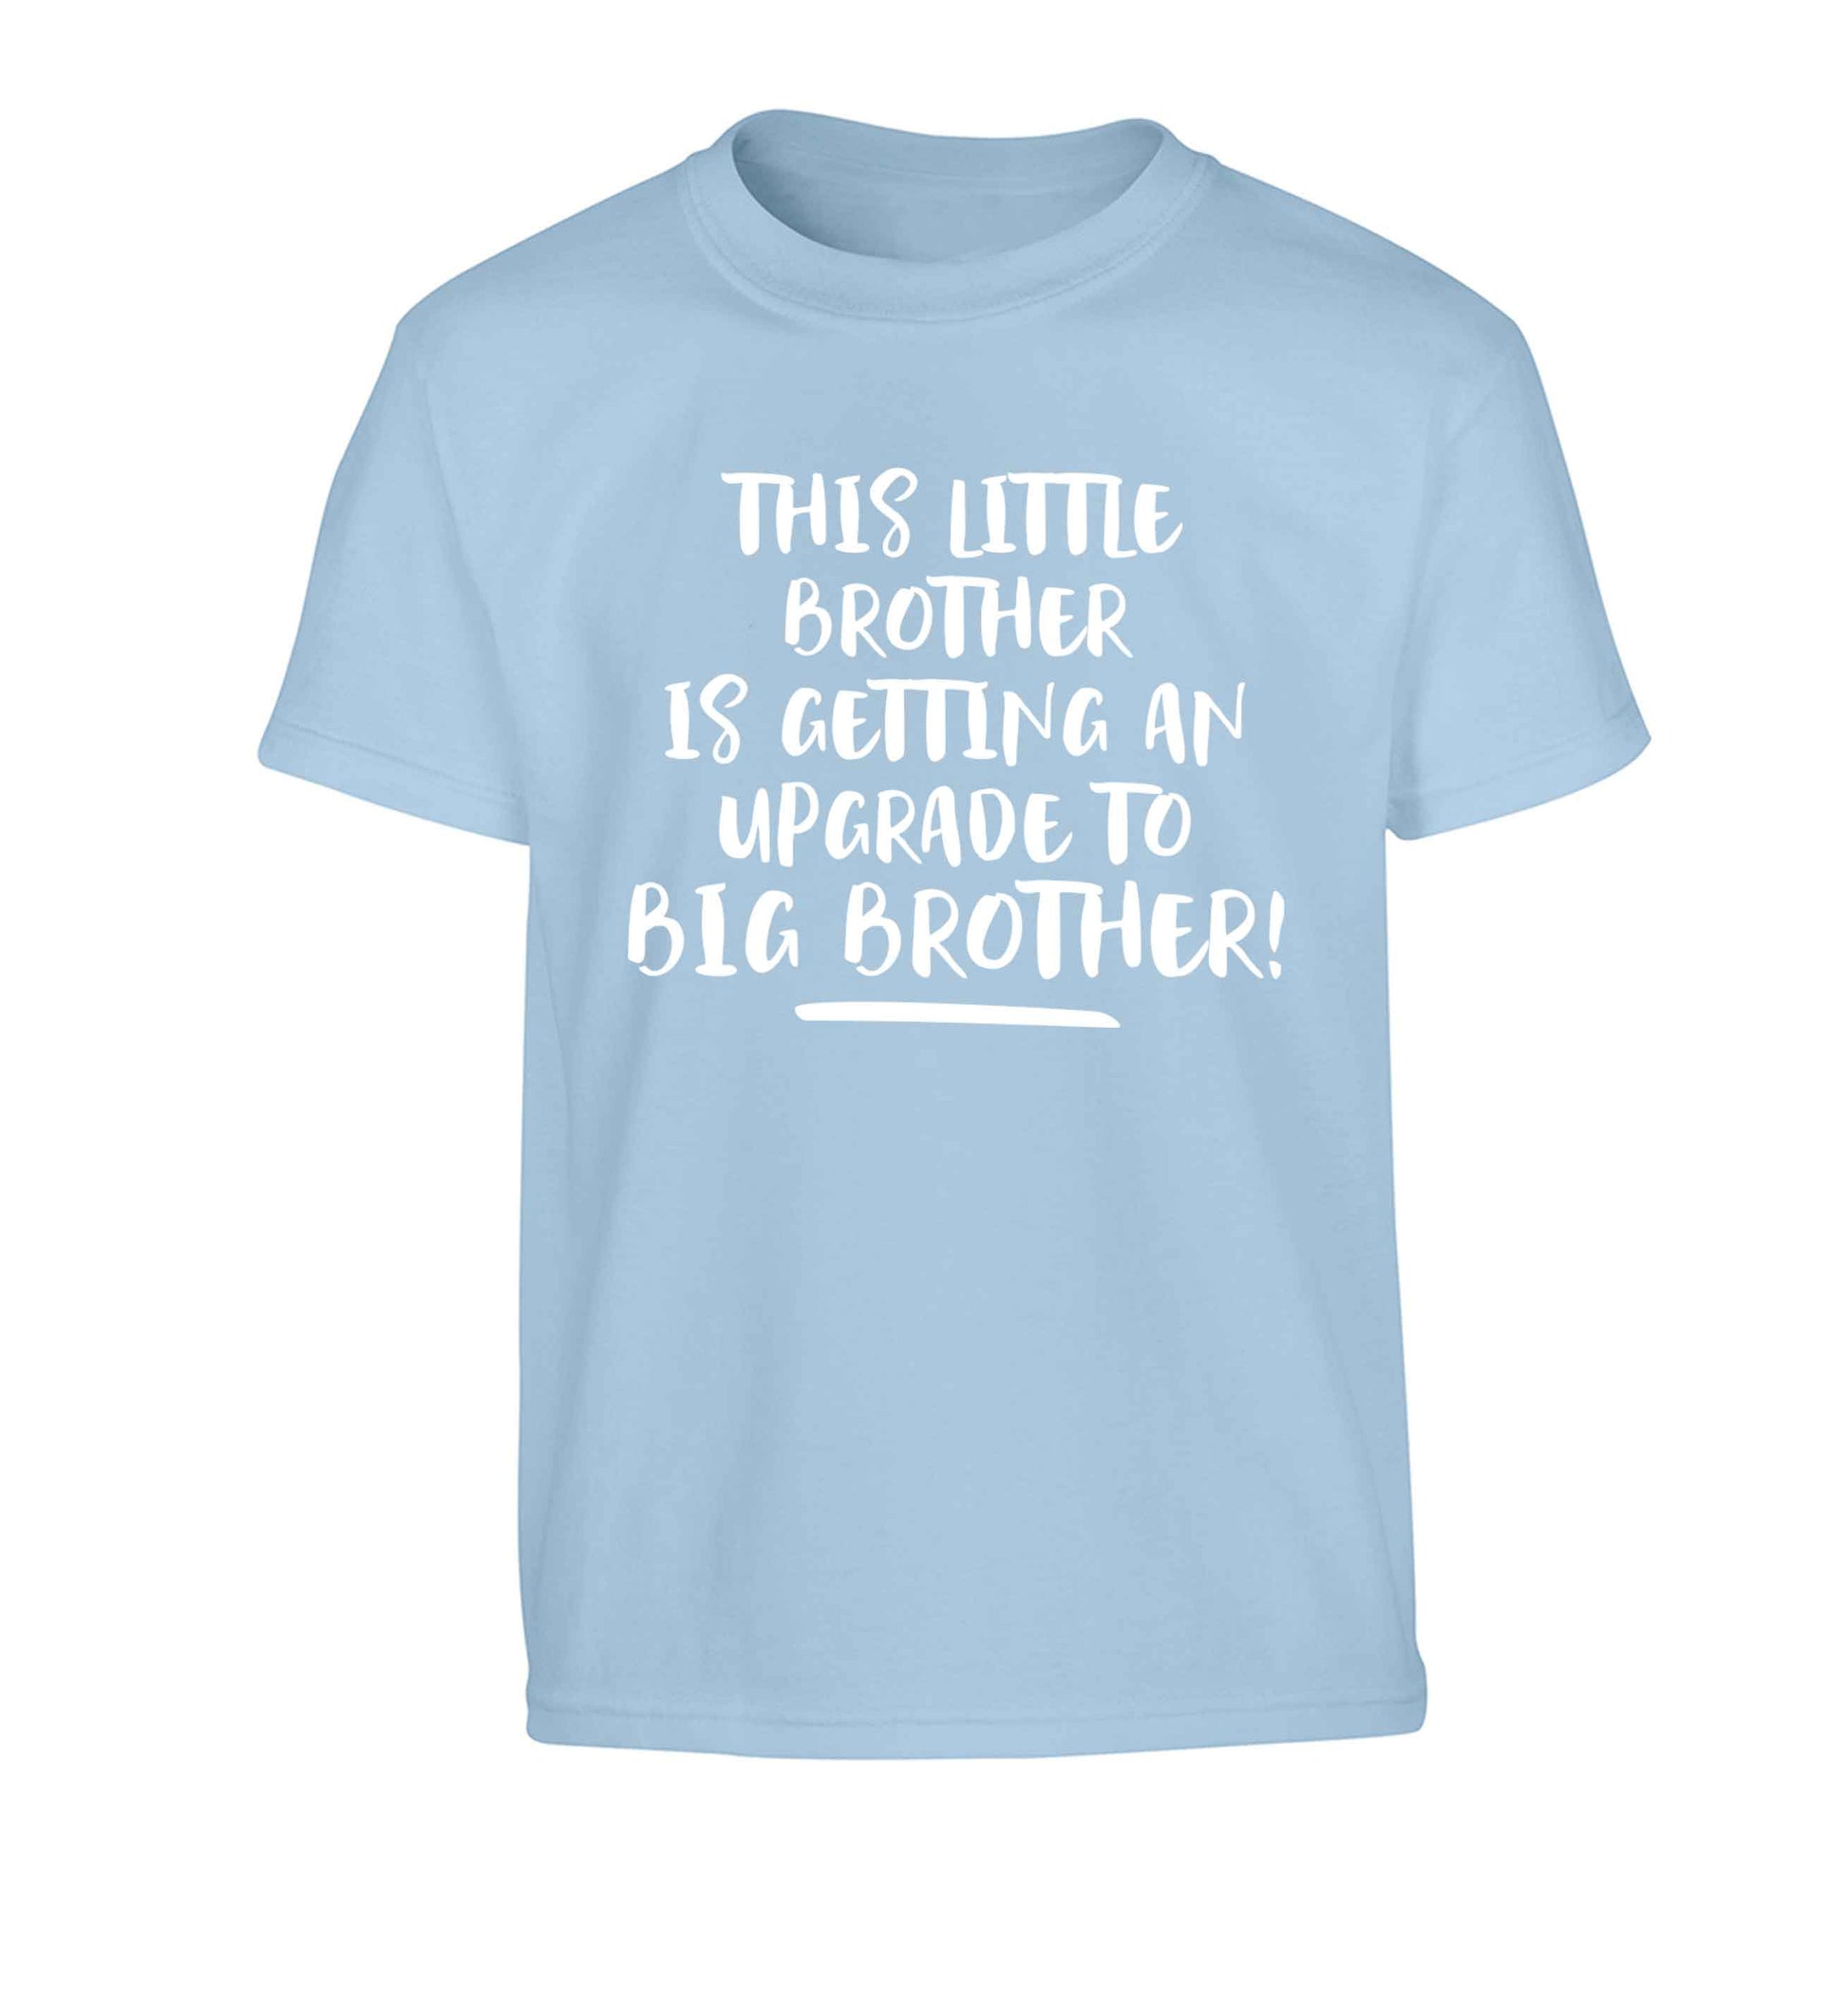 This little brother is getting an upgrade to big brother! Children's light blue Tshirt 12-13 Years